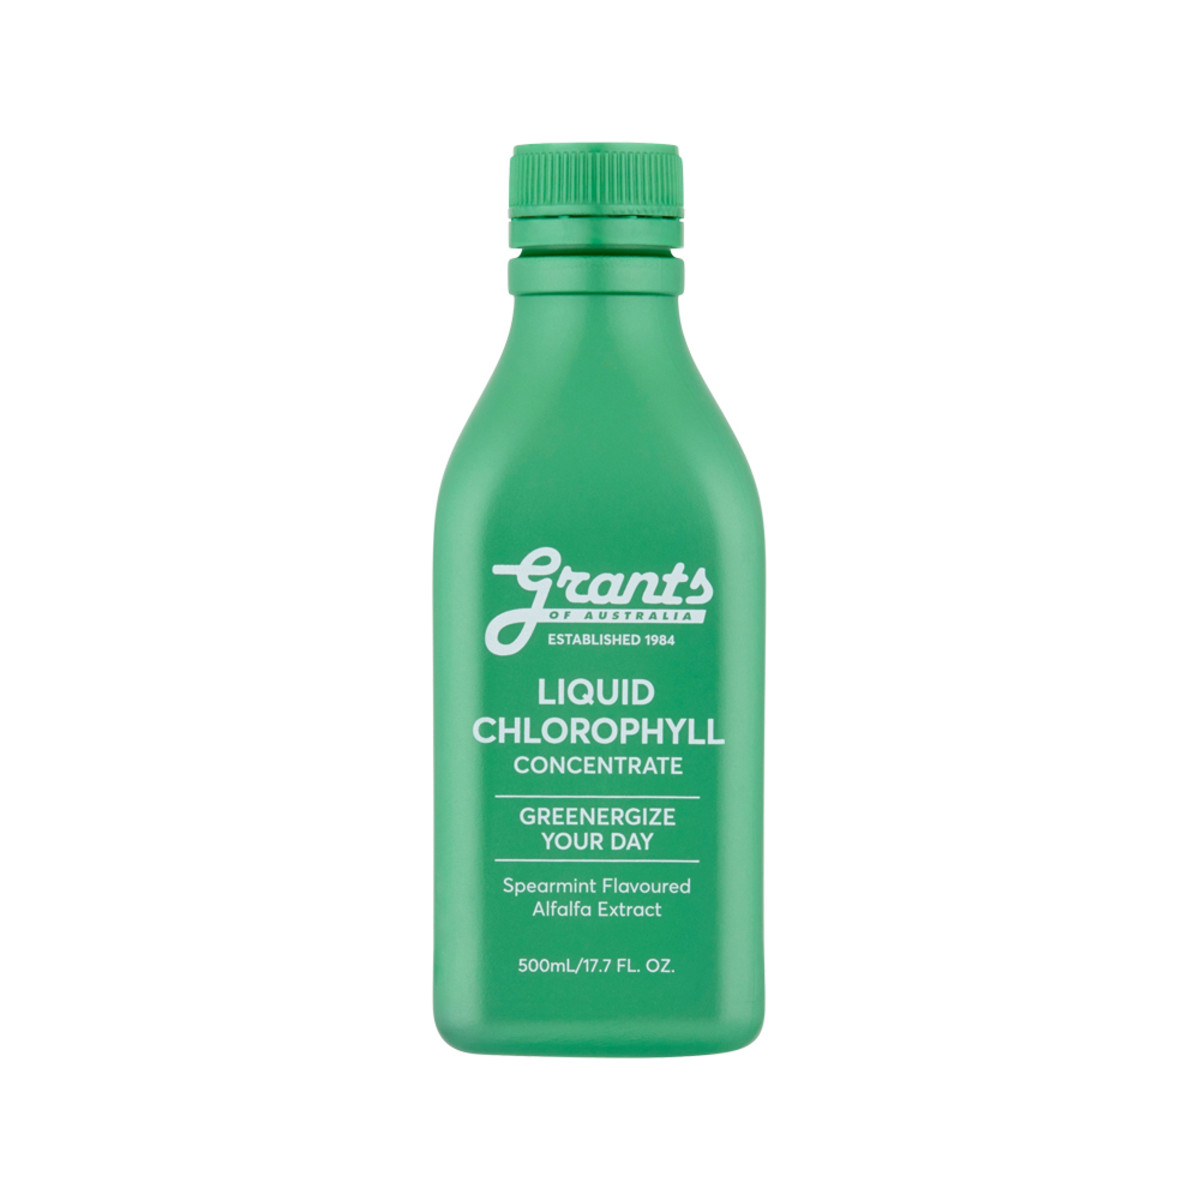 Grants Of Australia Liquid Chlorophyll Concentrate (Spearmint Flavoured Alfalfa Extract) 500ml